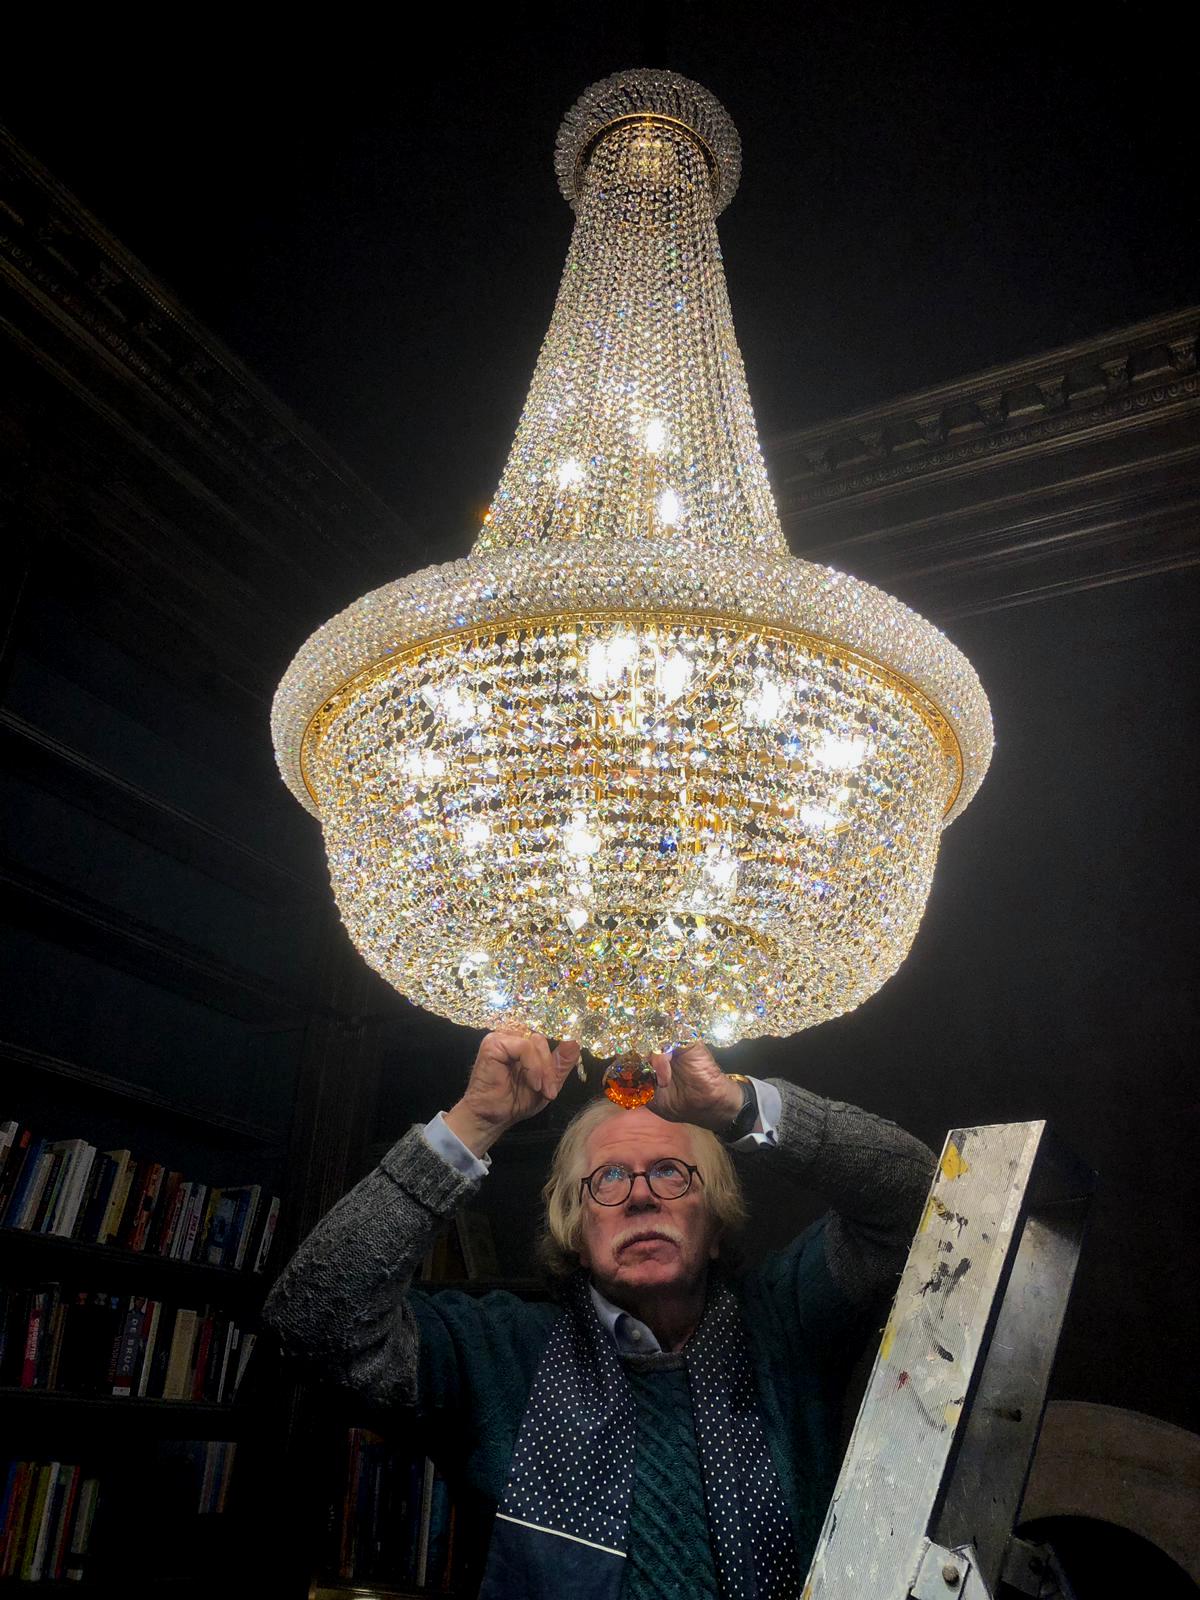 The Crystal Bag chandelier or pocket crown is a timeless Classic model. The pocket crown in the photo is styled in old library. The chandelier in the picture has a diameter of 70 cm and a height of 140 cm. The chandelier is specially made with a